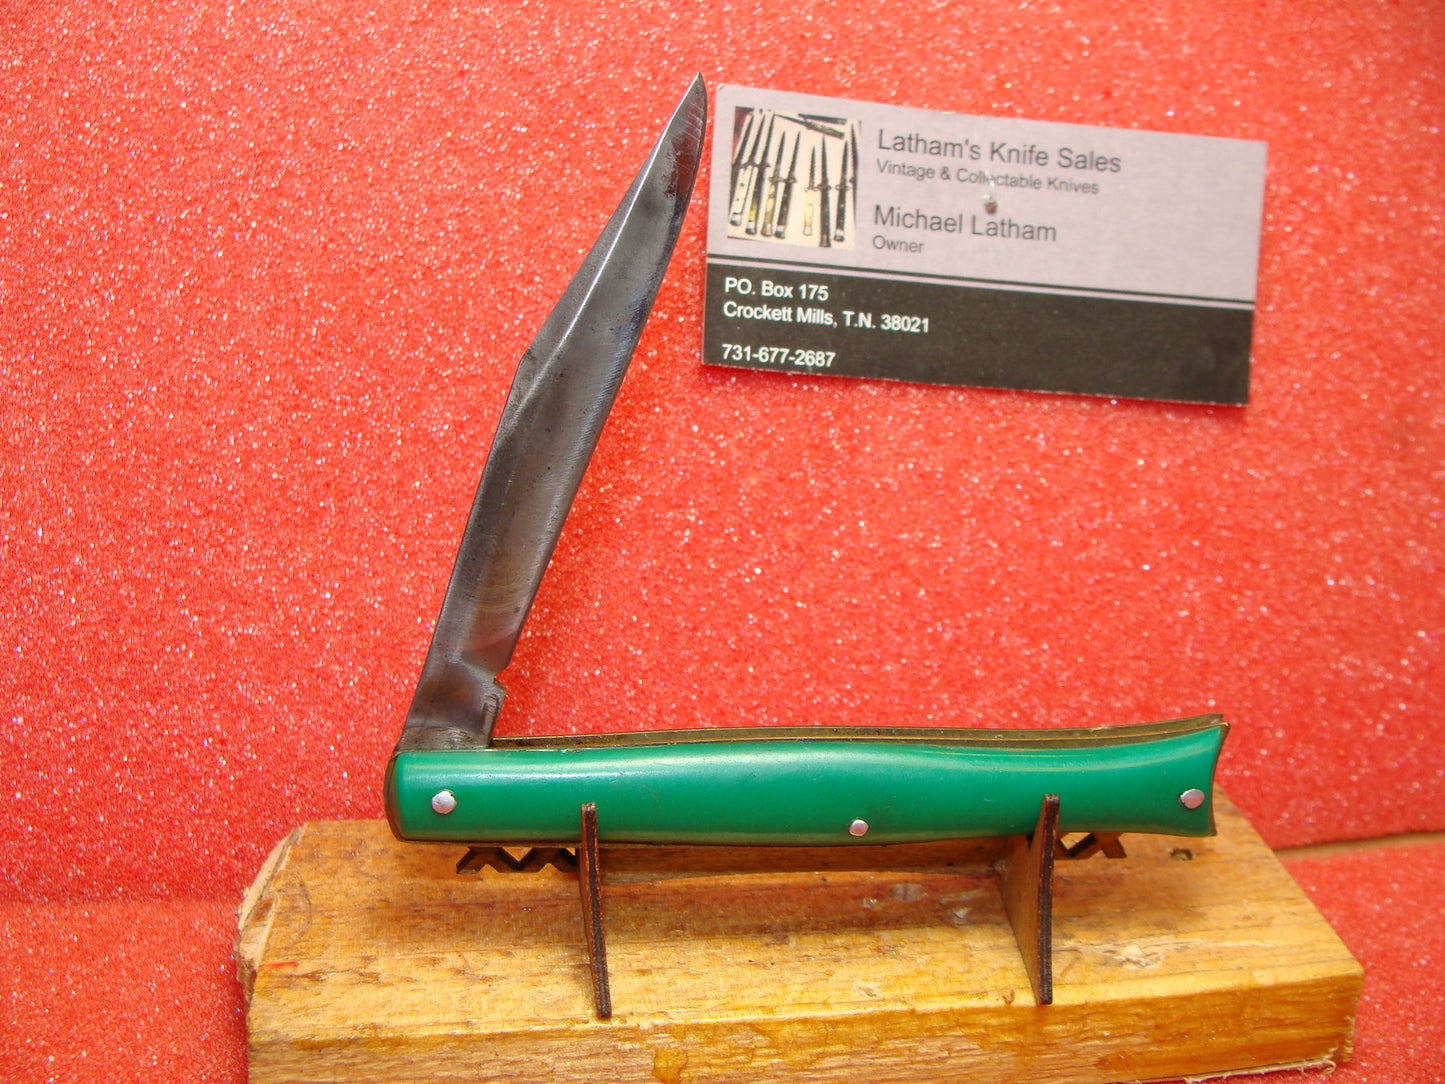 EDGEMASTER USA 1936-56 VINTAGE AMERICAN AUTOMATIC KNIFE 4" FISH TAIL SABER BLADE SHADOW BOLSTERS DARK GREEN COMPOSITION HANDLES